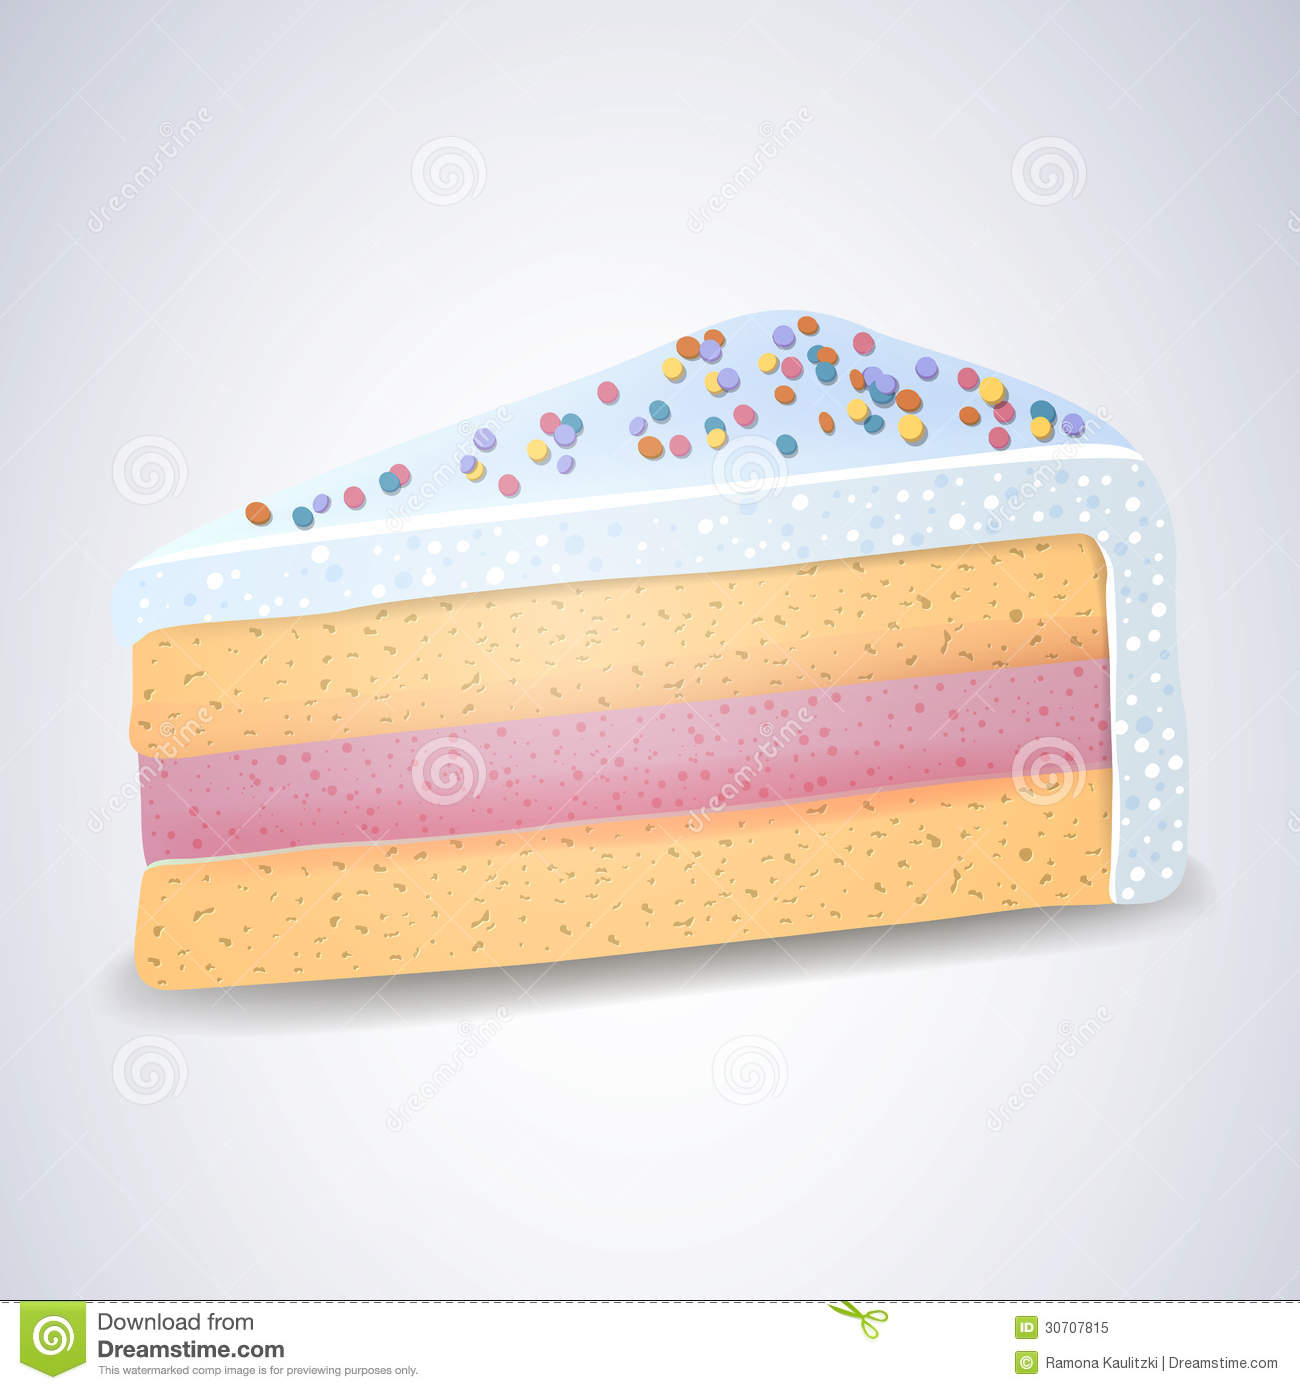 Pin Its A Piece Of Cake Retro Clipart Illustration Stock Vector Cake